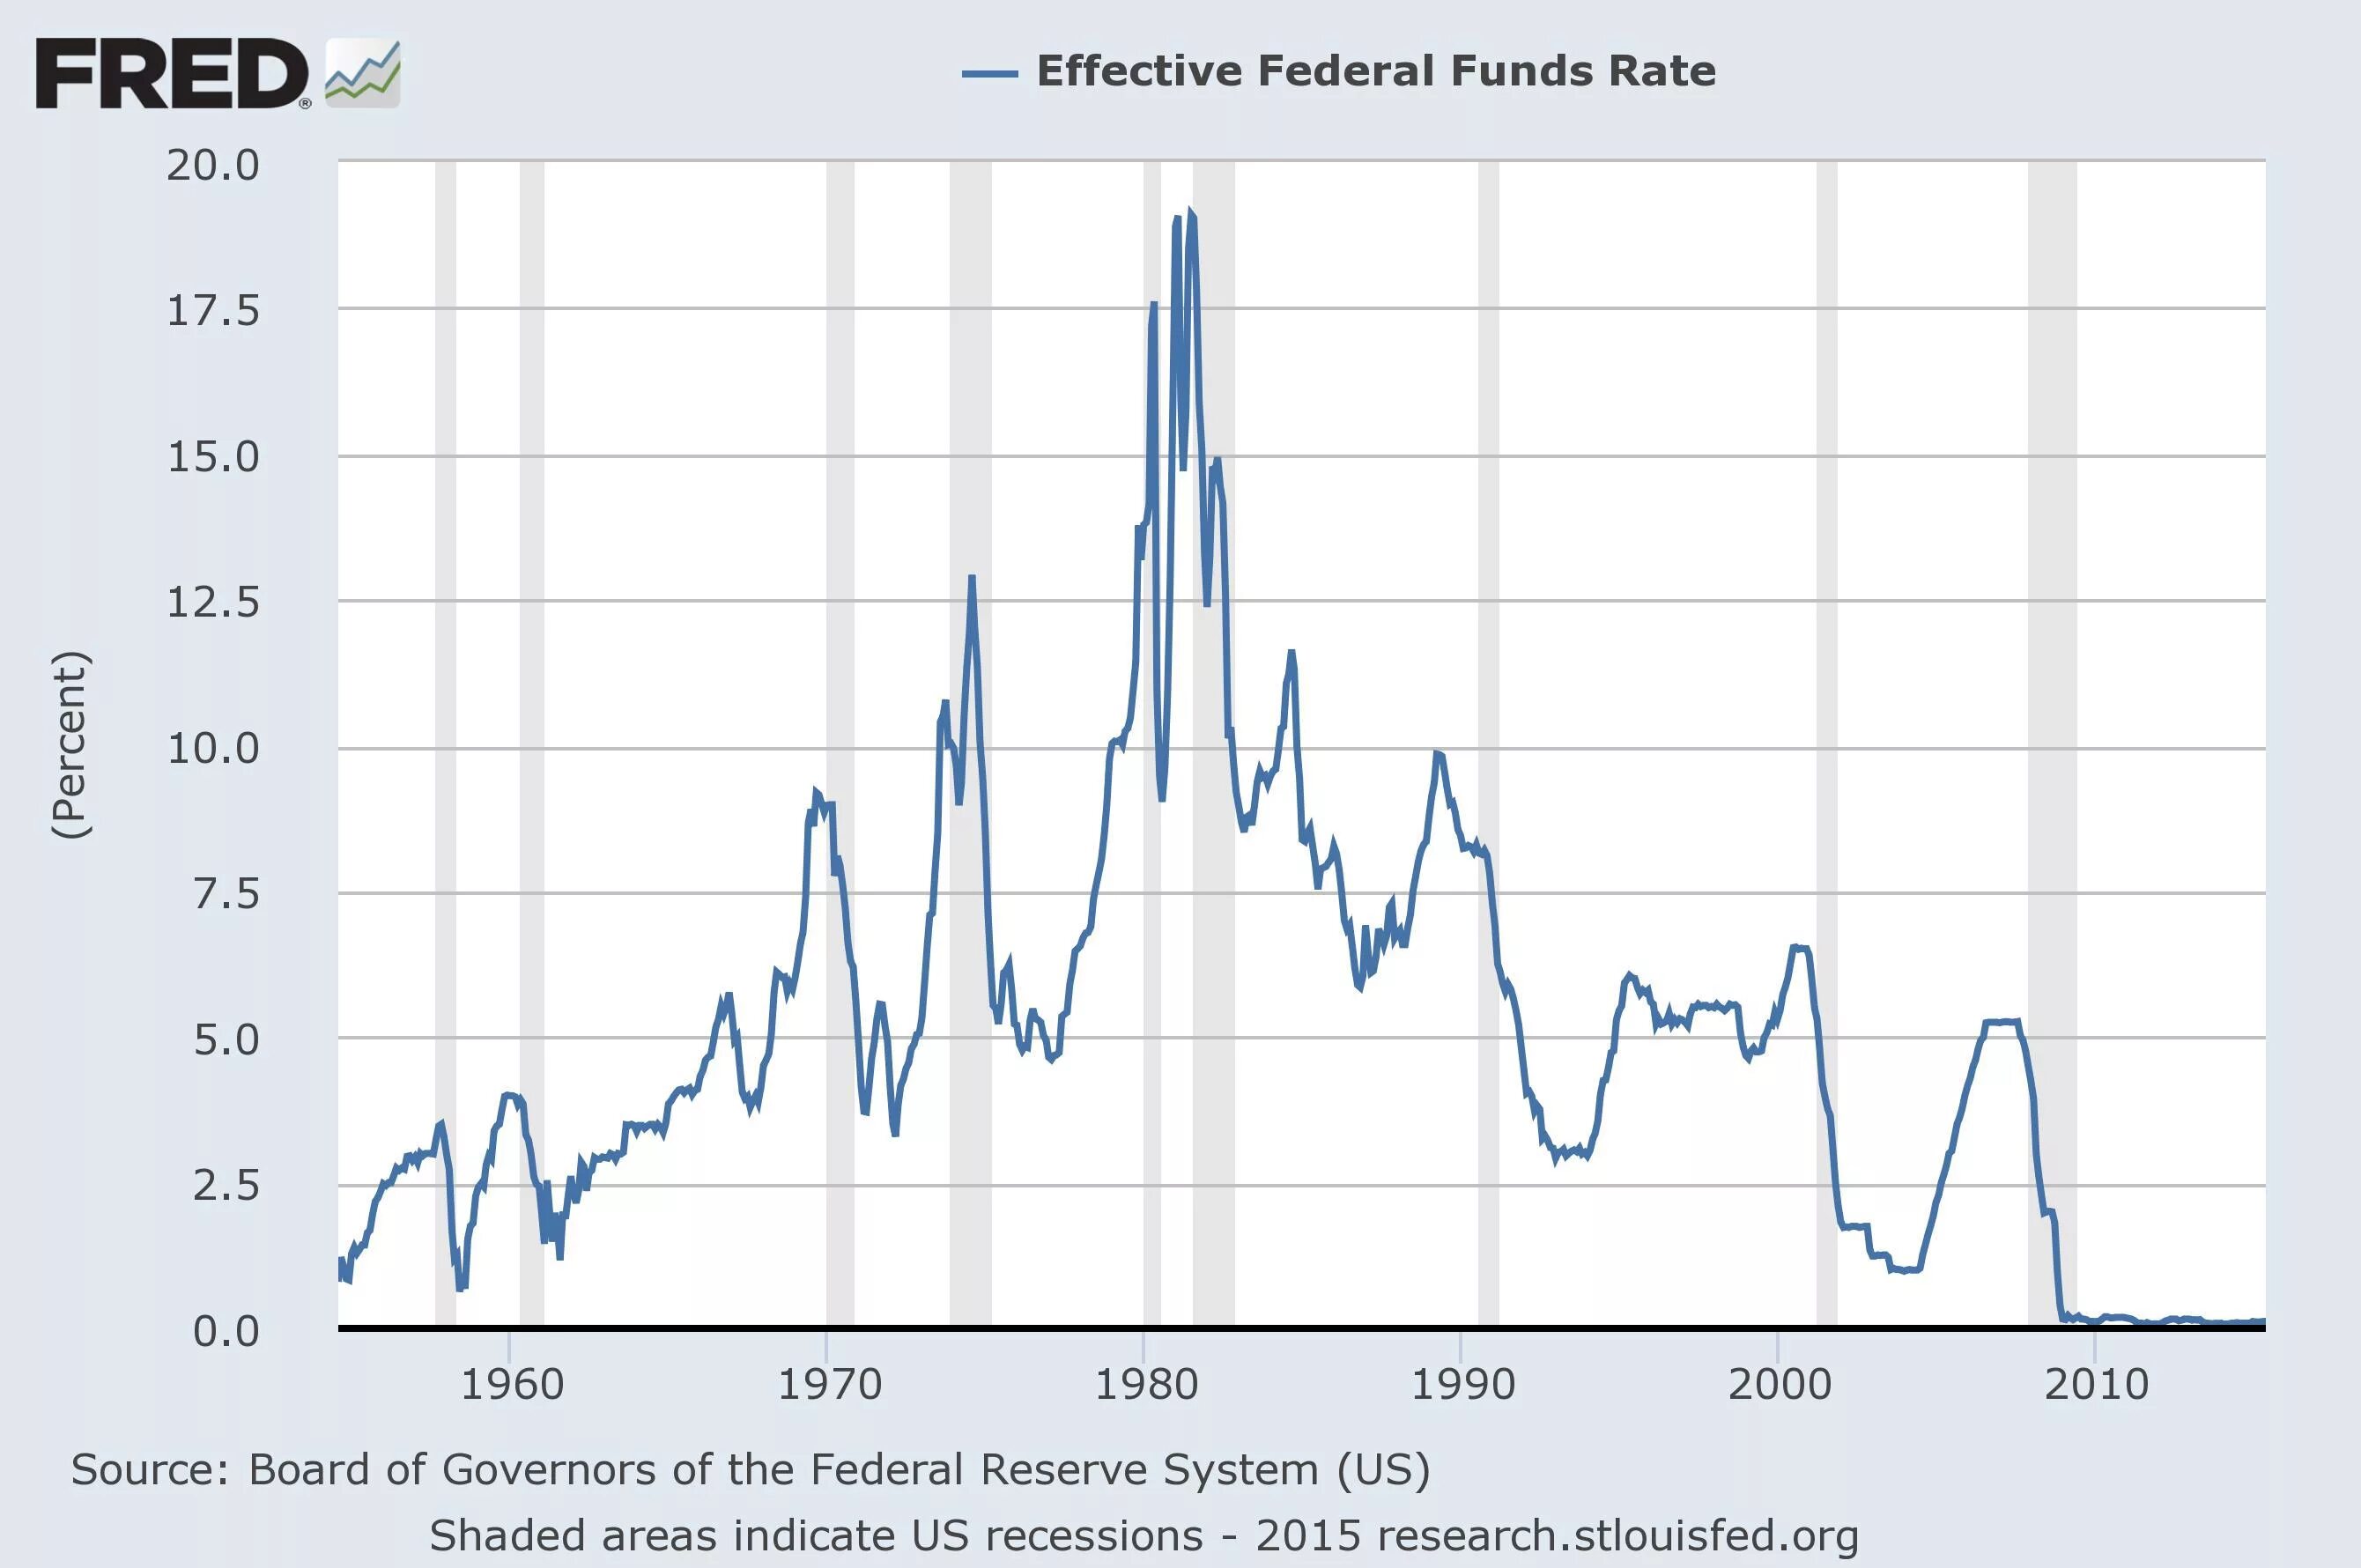 Fed Funds rate Fred. Fed rate 2.50. Raise interest rates. X50 rates. Two rates